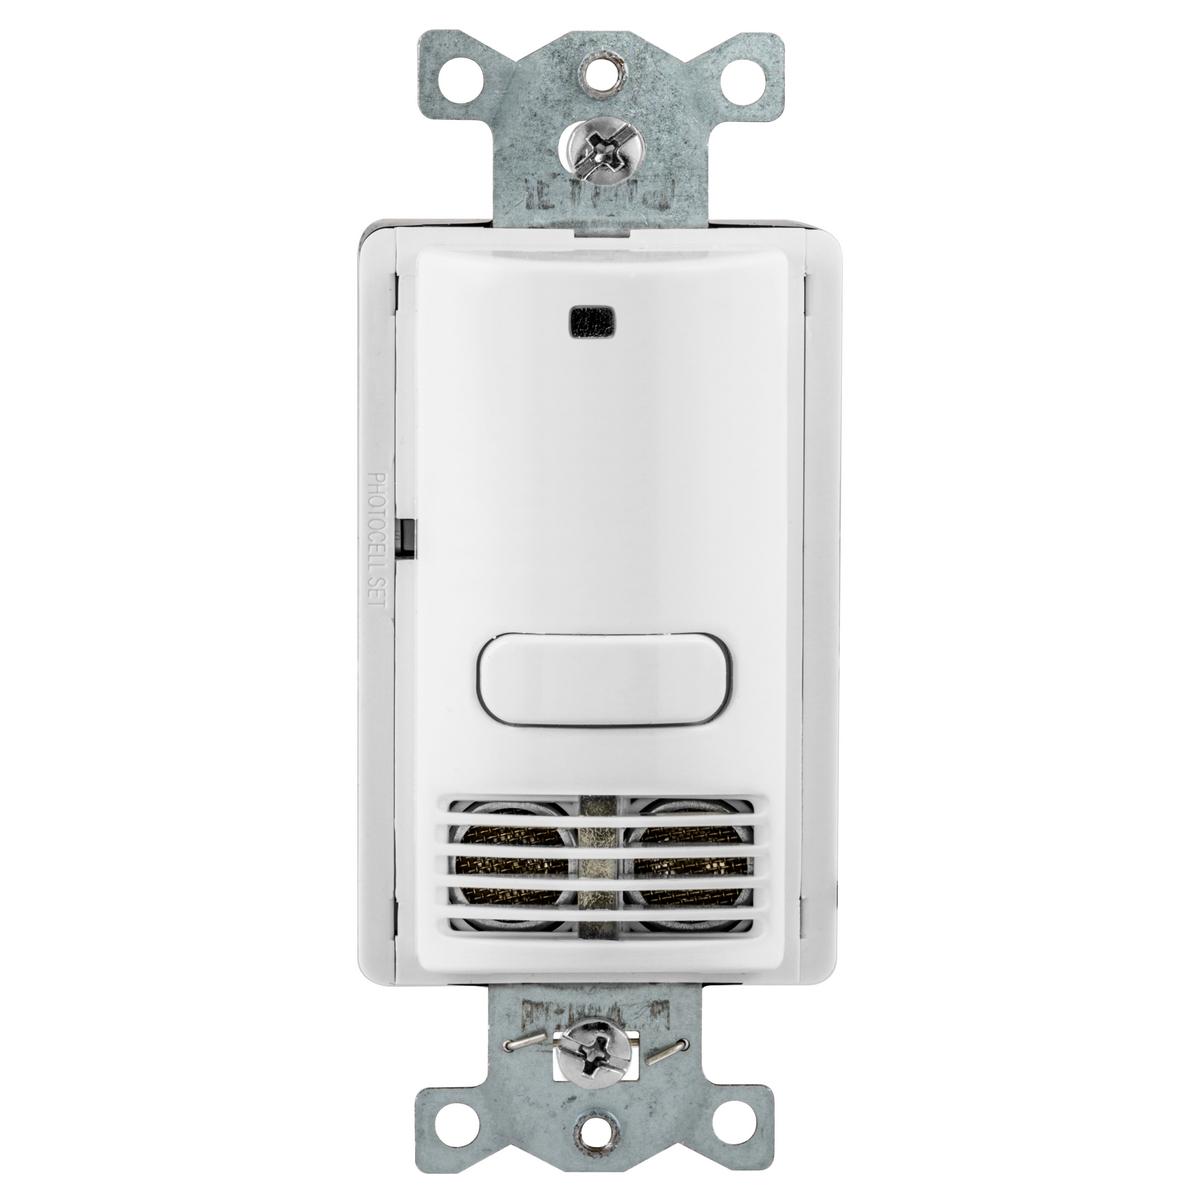 Hubbell AU2001W1 Occupancy Sensing Products, Wall Switch,Vacancy, Ultrasonic, 1 Relay, 1000 Square Feet, 800W Incandescent, 1000WFluorescent @ 120V AC, 1800W Fluorescent @ 277VAC,120/277V AC, WithPhotocell, White 